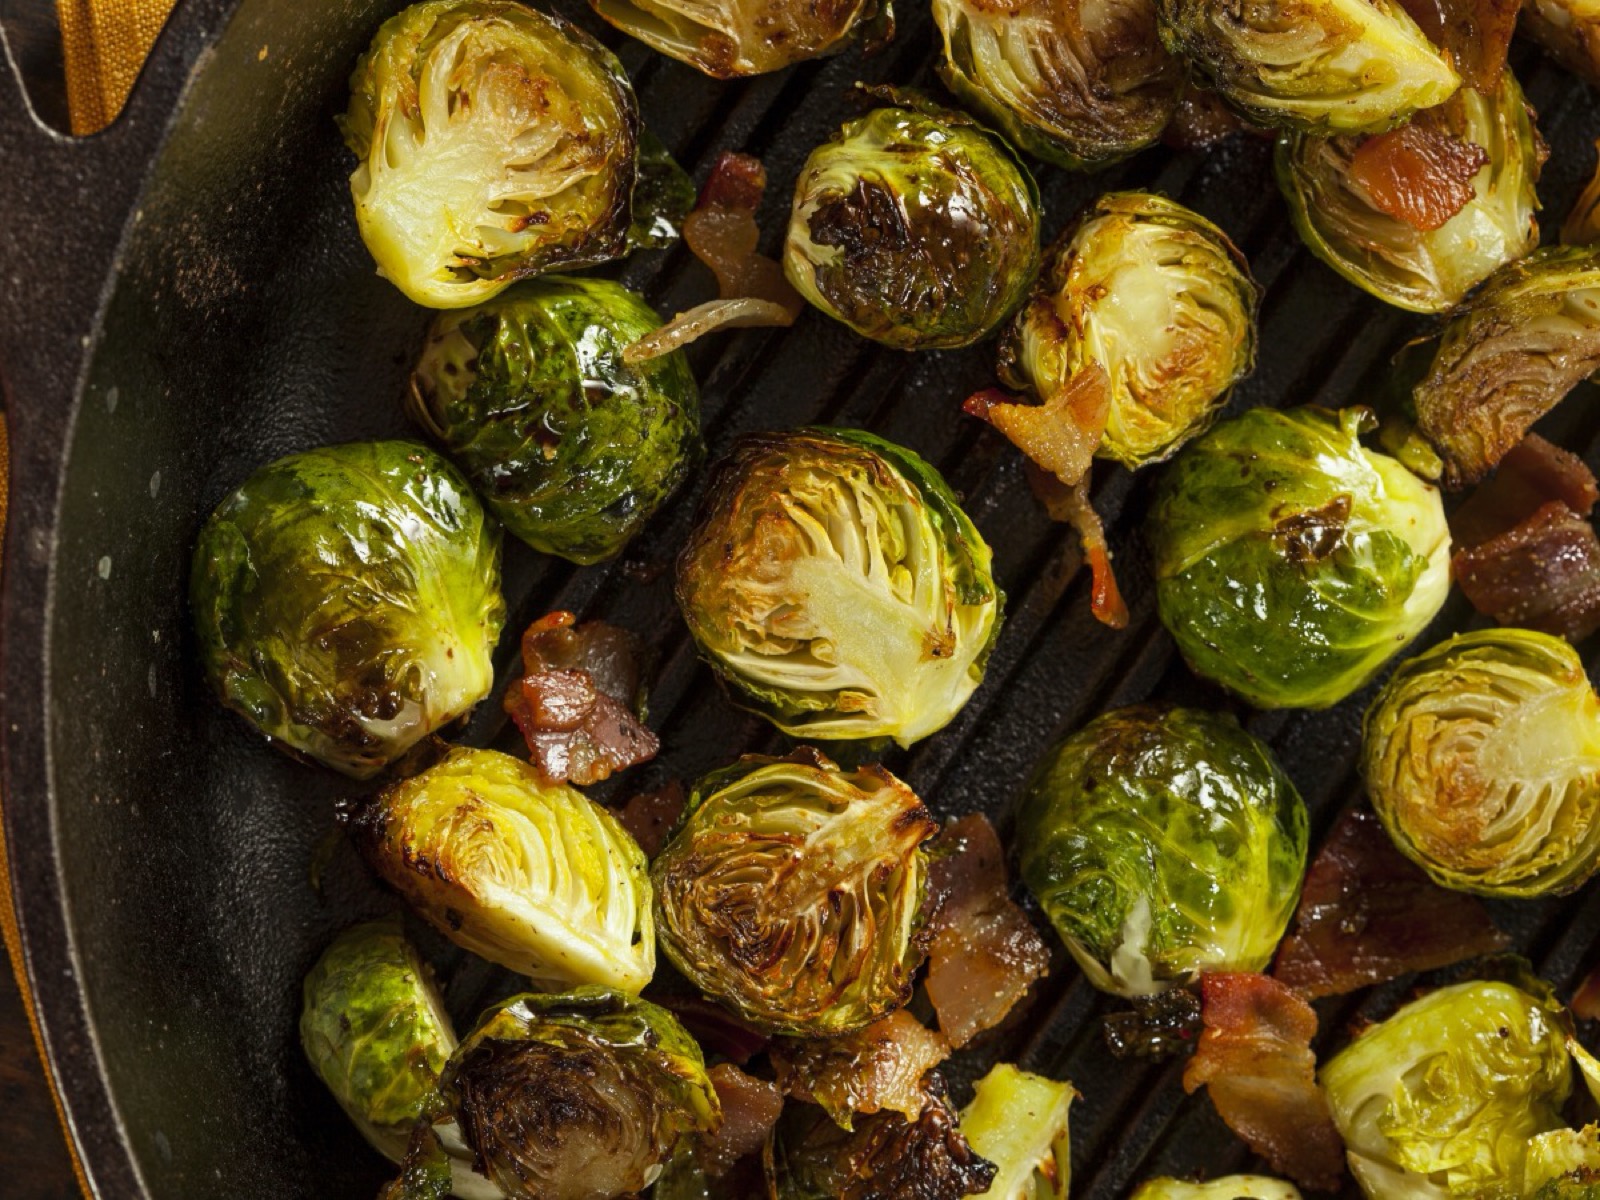 🍆 If You’ll Eat at Least 18/25 of These Vegetables, Then You’re Not a Picky Eater Brussels Sprouts With Balsamic Glaze